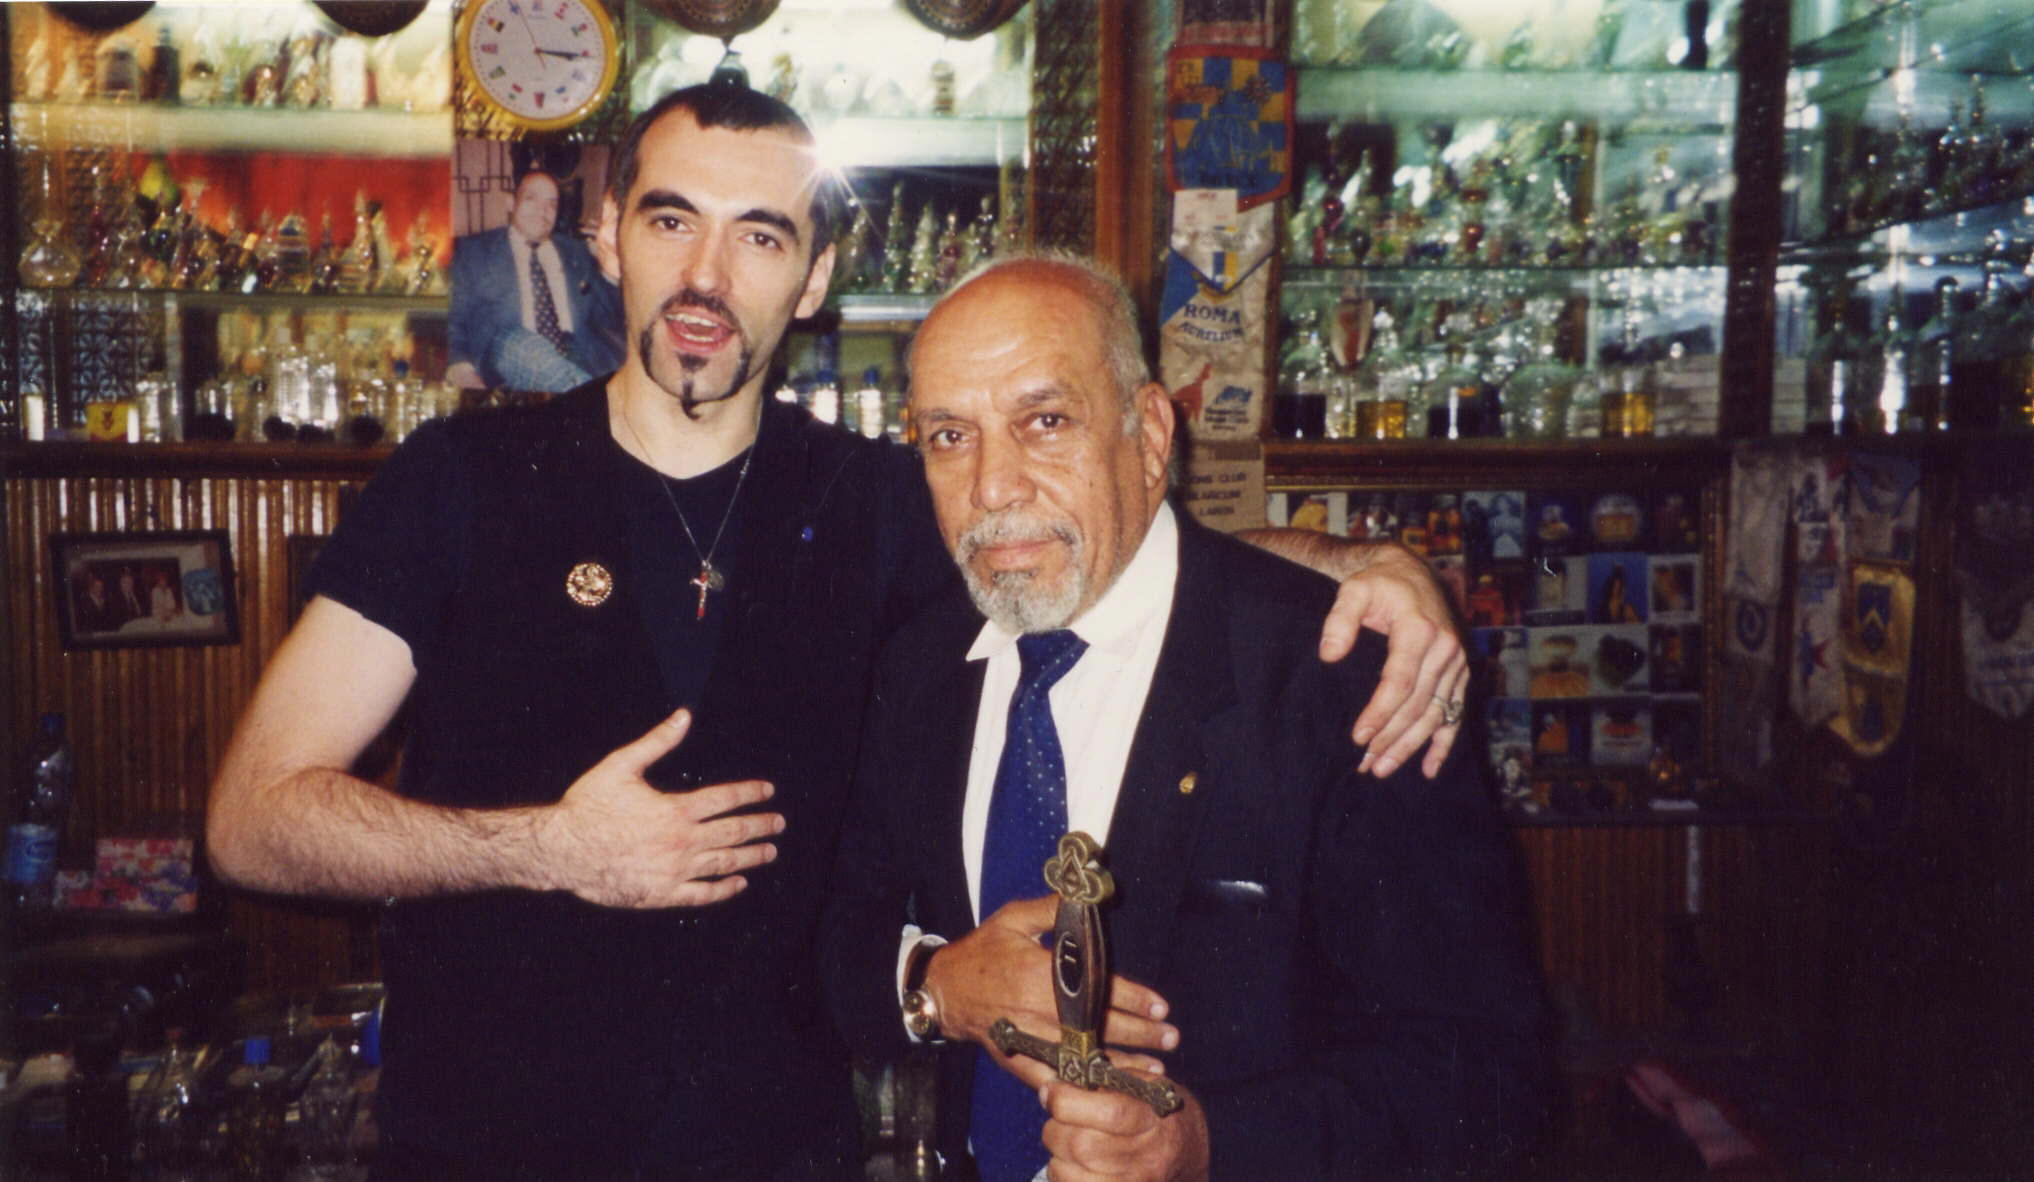 Leo Zagami (left) and Mohamed F. El Gabri from Club of Rome (right)